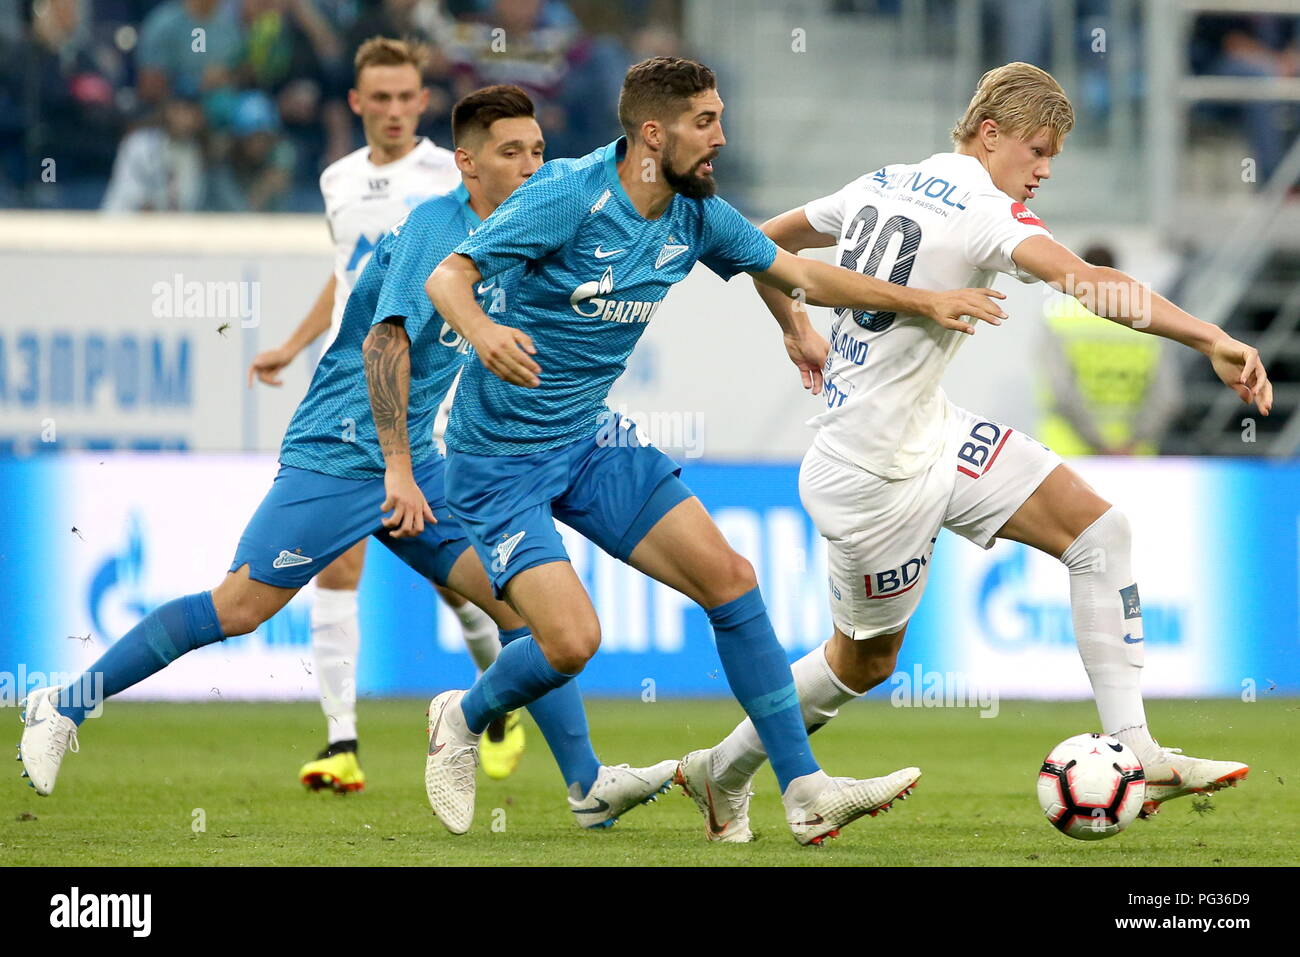 2018 19 Uefa Europa League Play Off Round High Resolution Stock Photography  and Images - Alamy